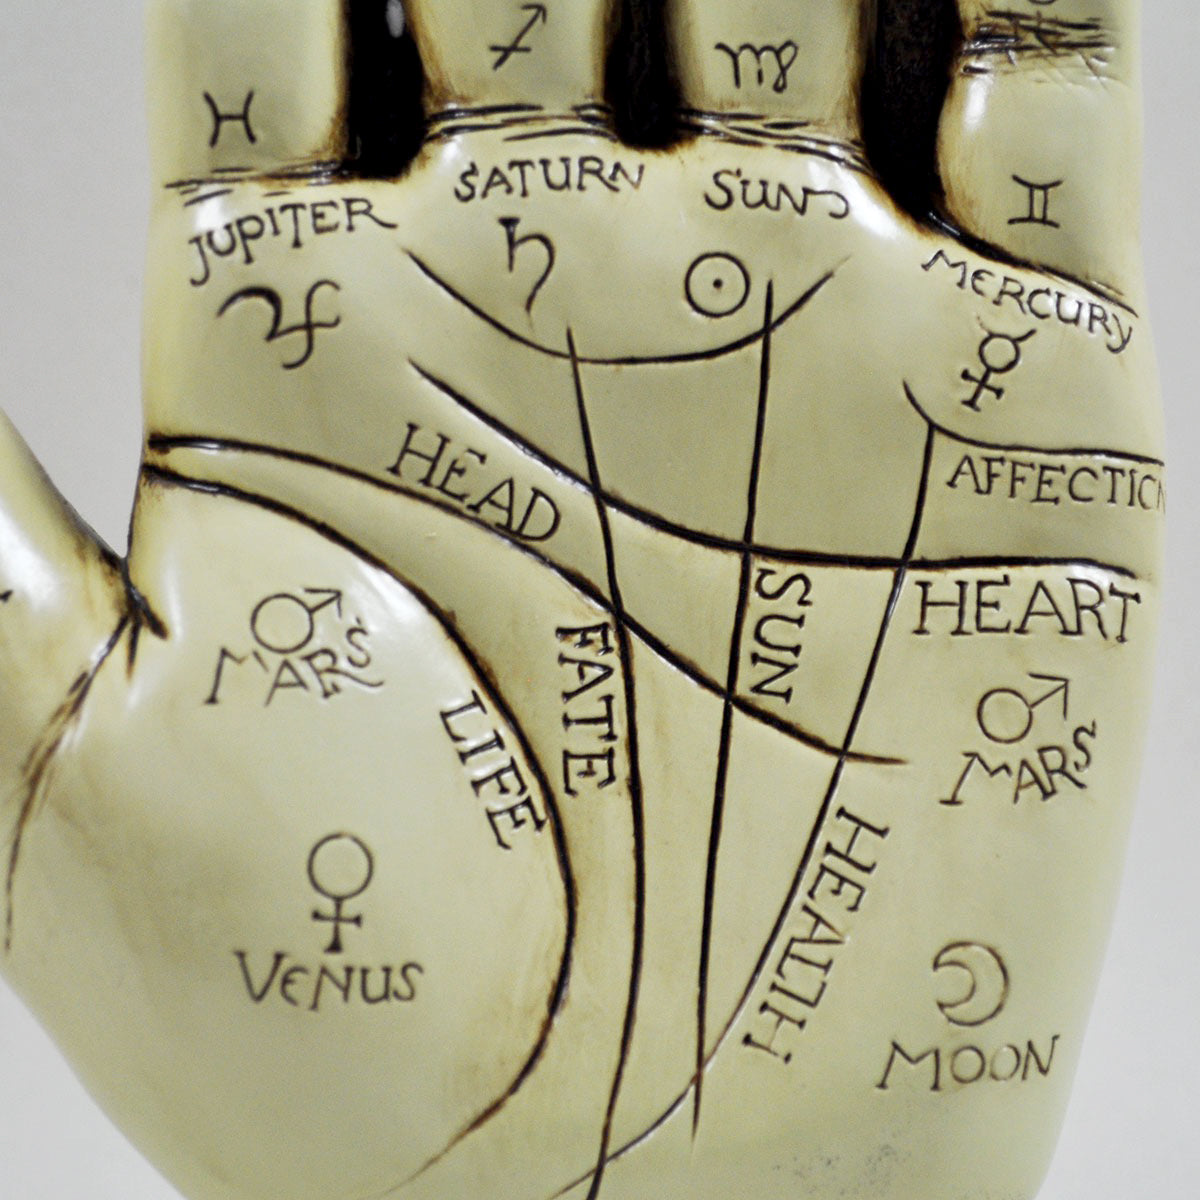 Palmistry Hand Sculpture For The Spiritual Minded Household